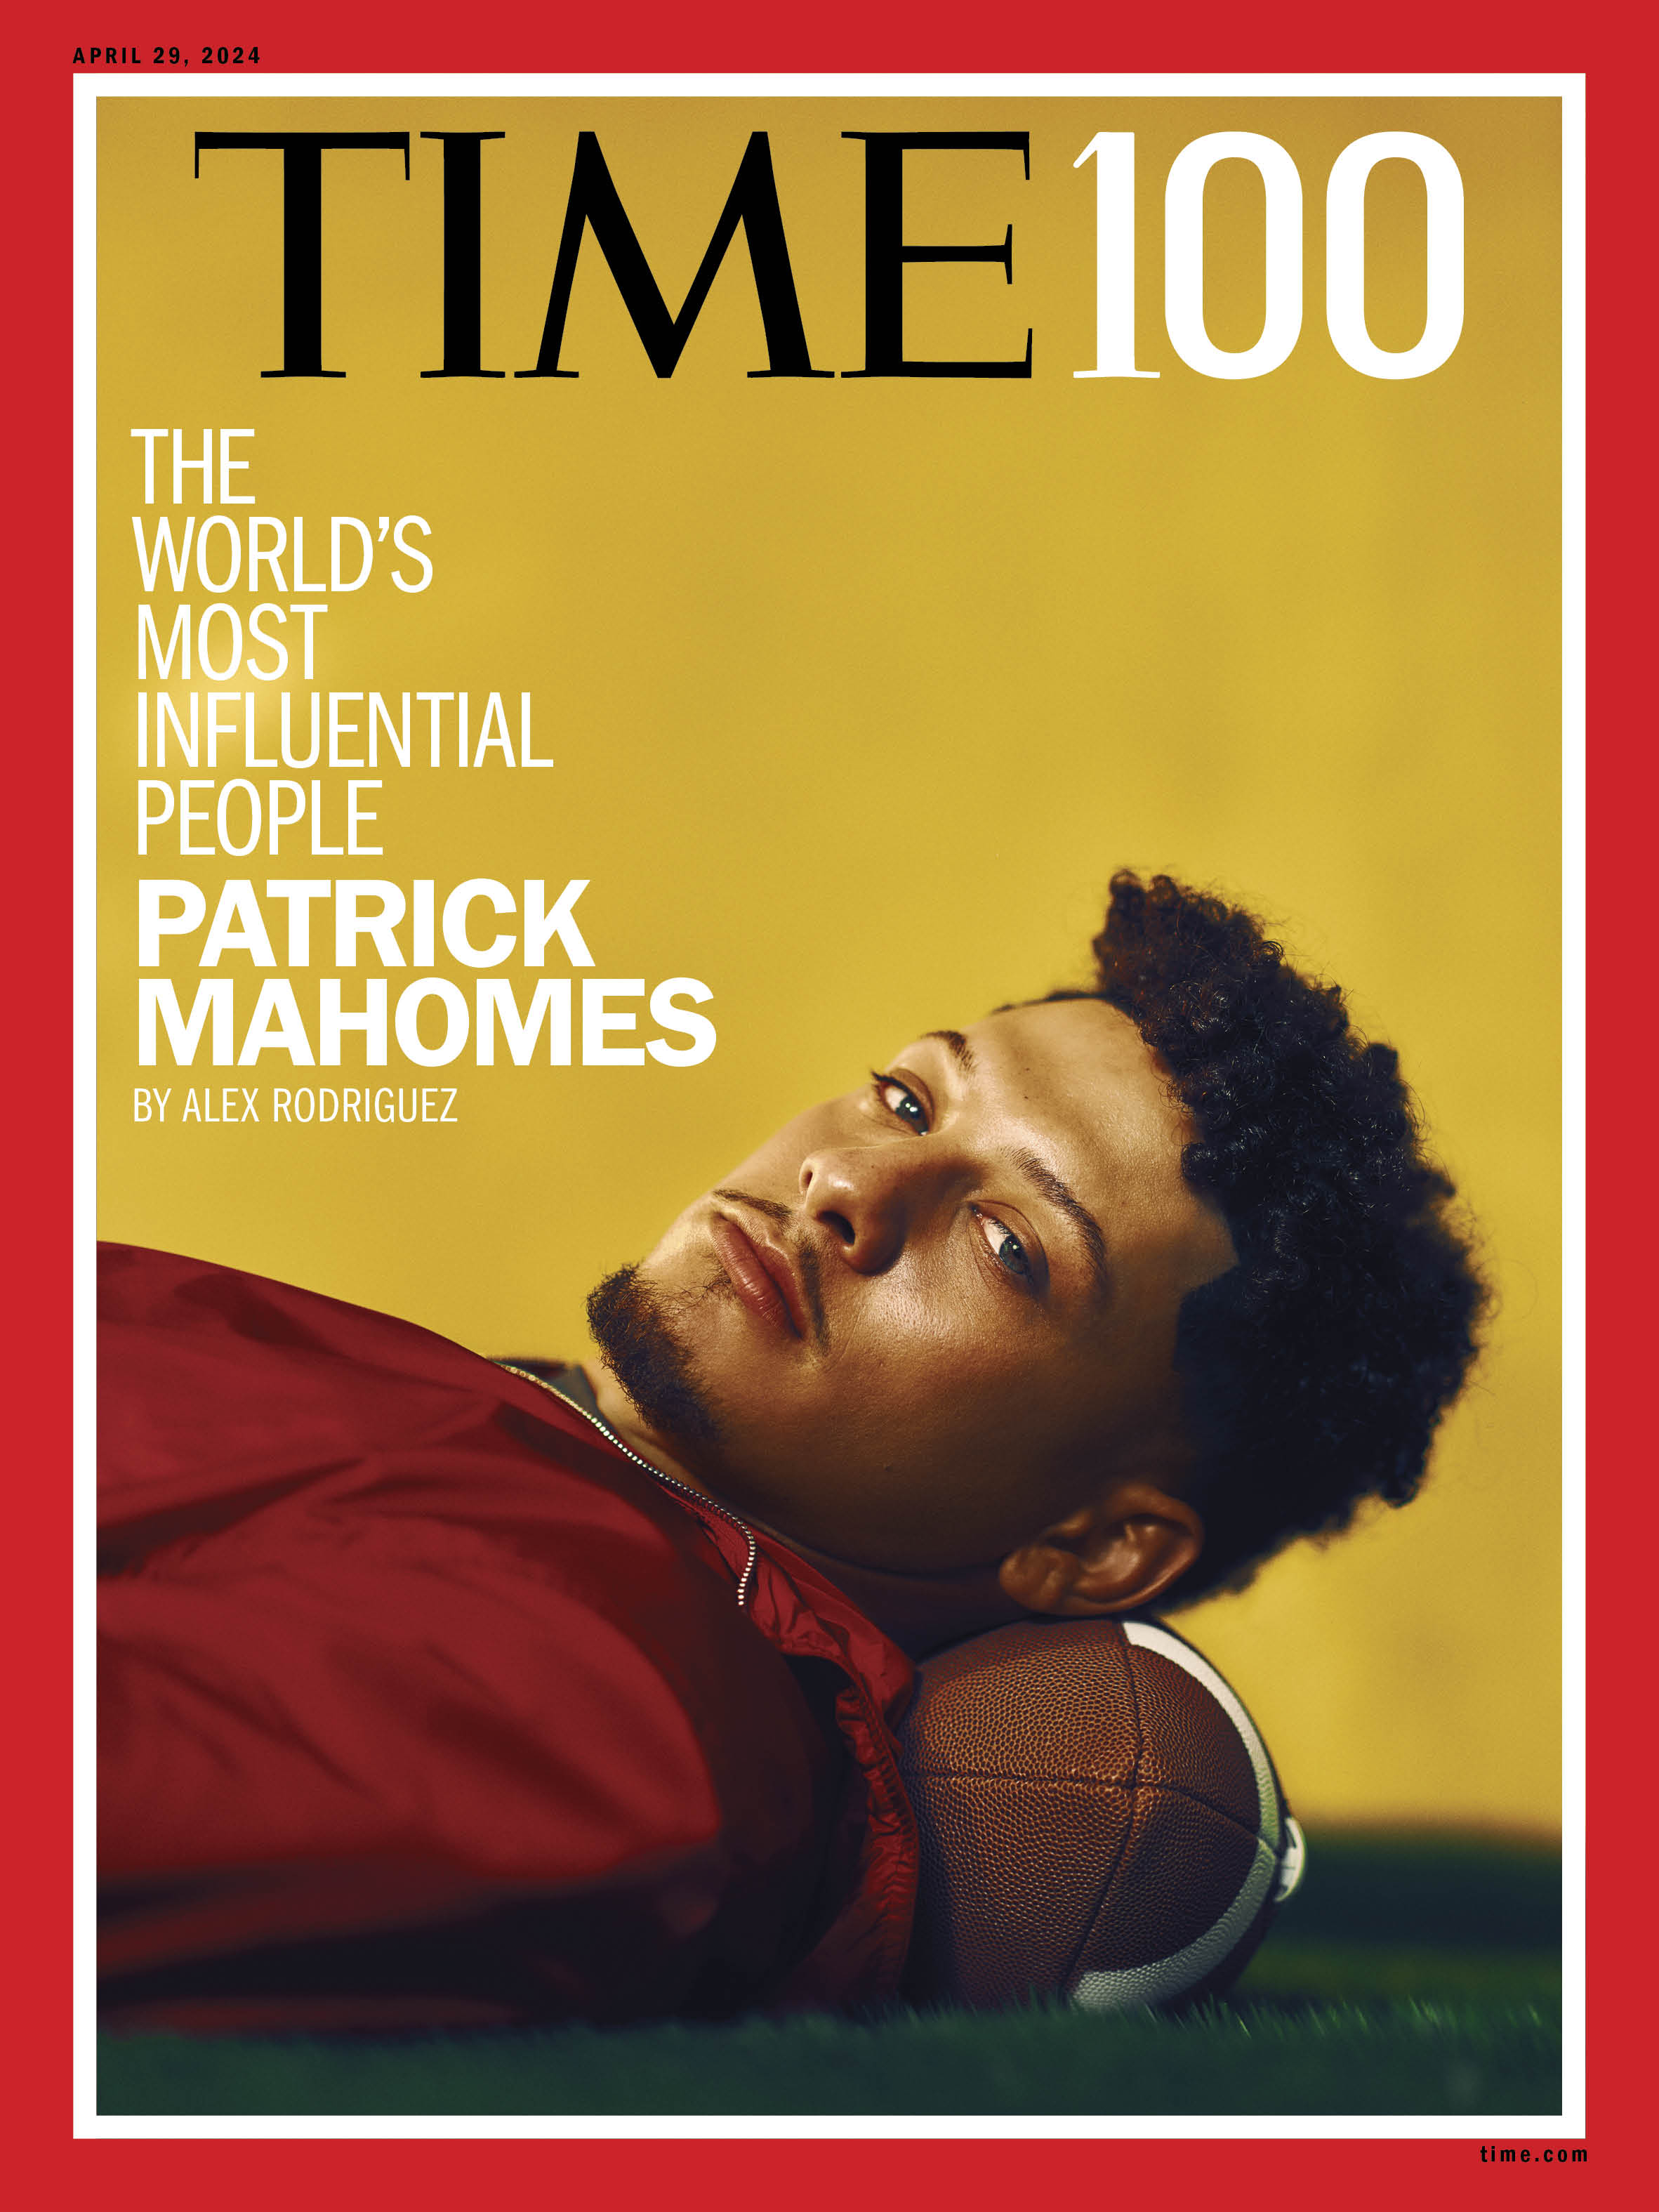 TIME 100 Patrick Mahomes Cover